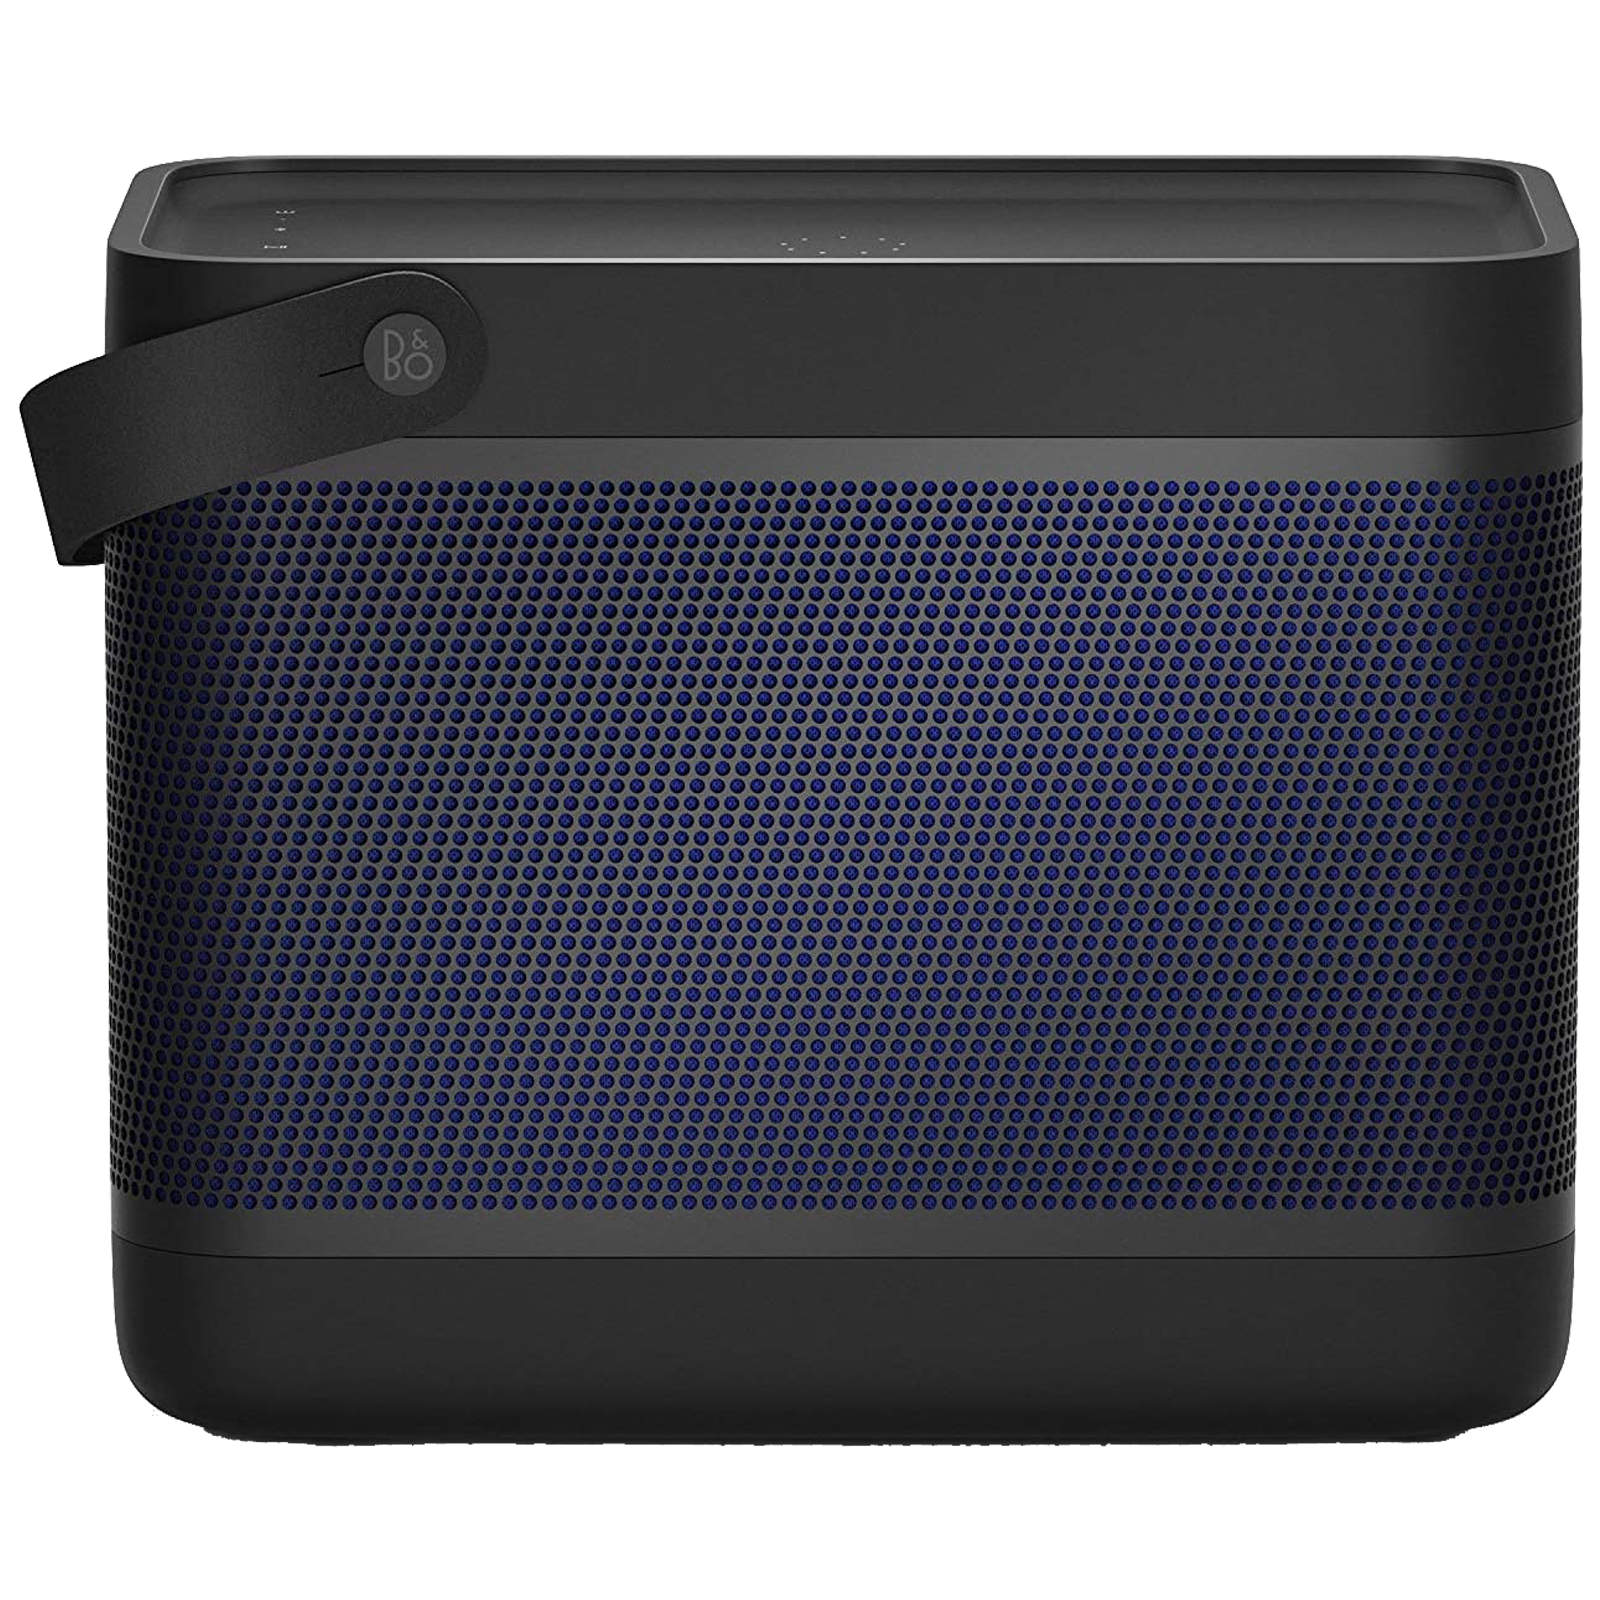 Bang & Olufsen Beolit 20 70 Watts Portable Bluetooth Speaker (Fast Charging Capability, BO-BL20-BLK/ANT, Black Anthracite)_1